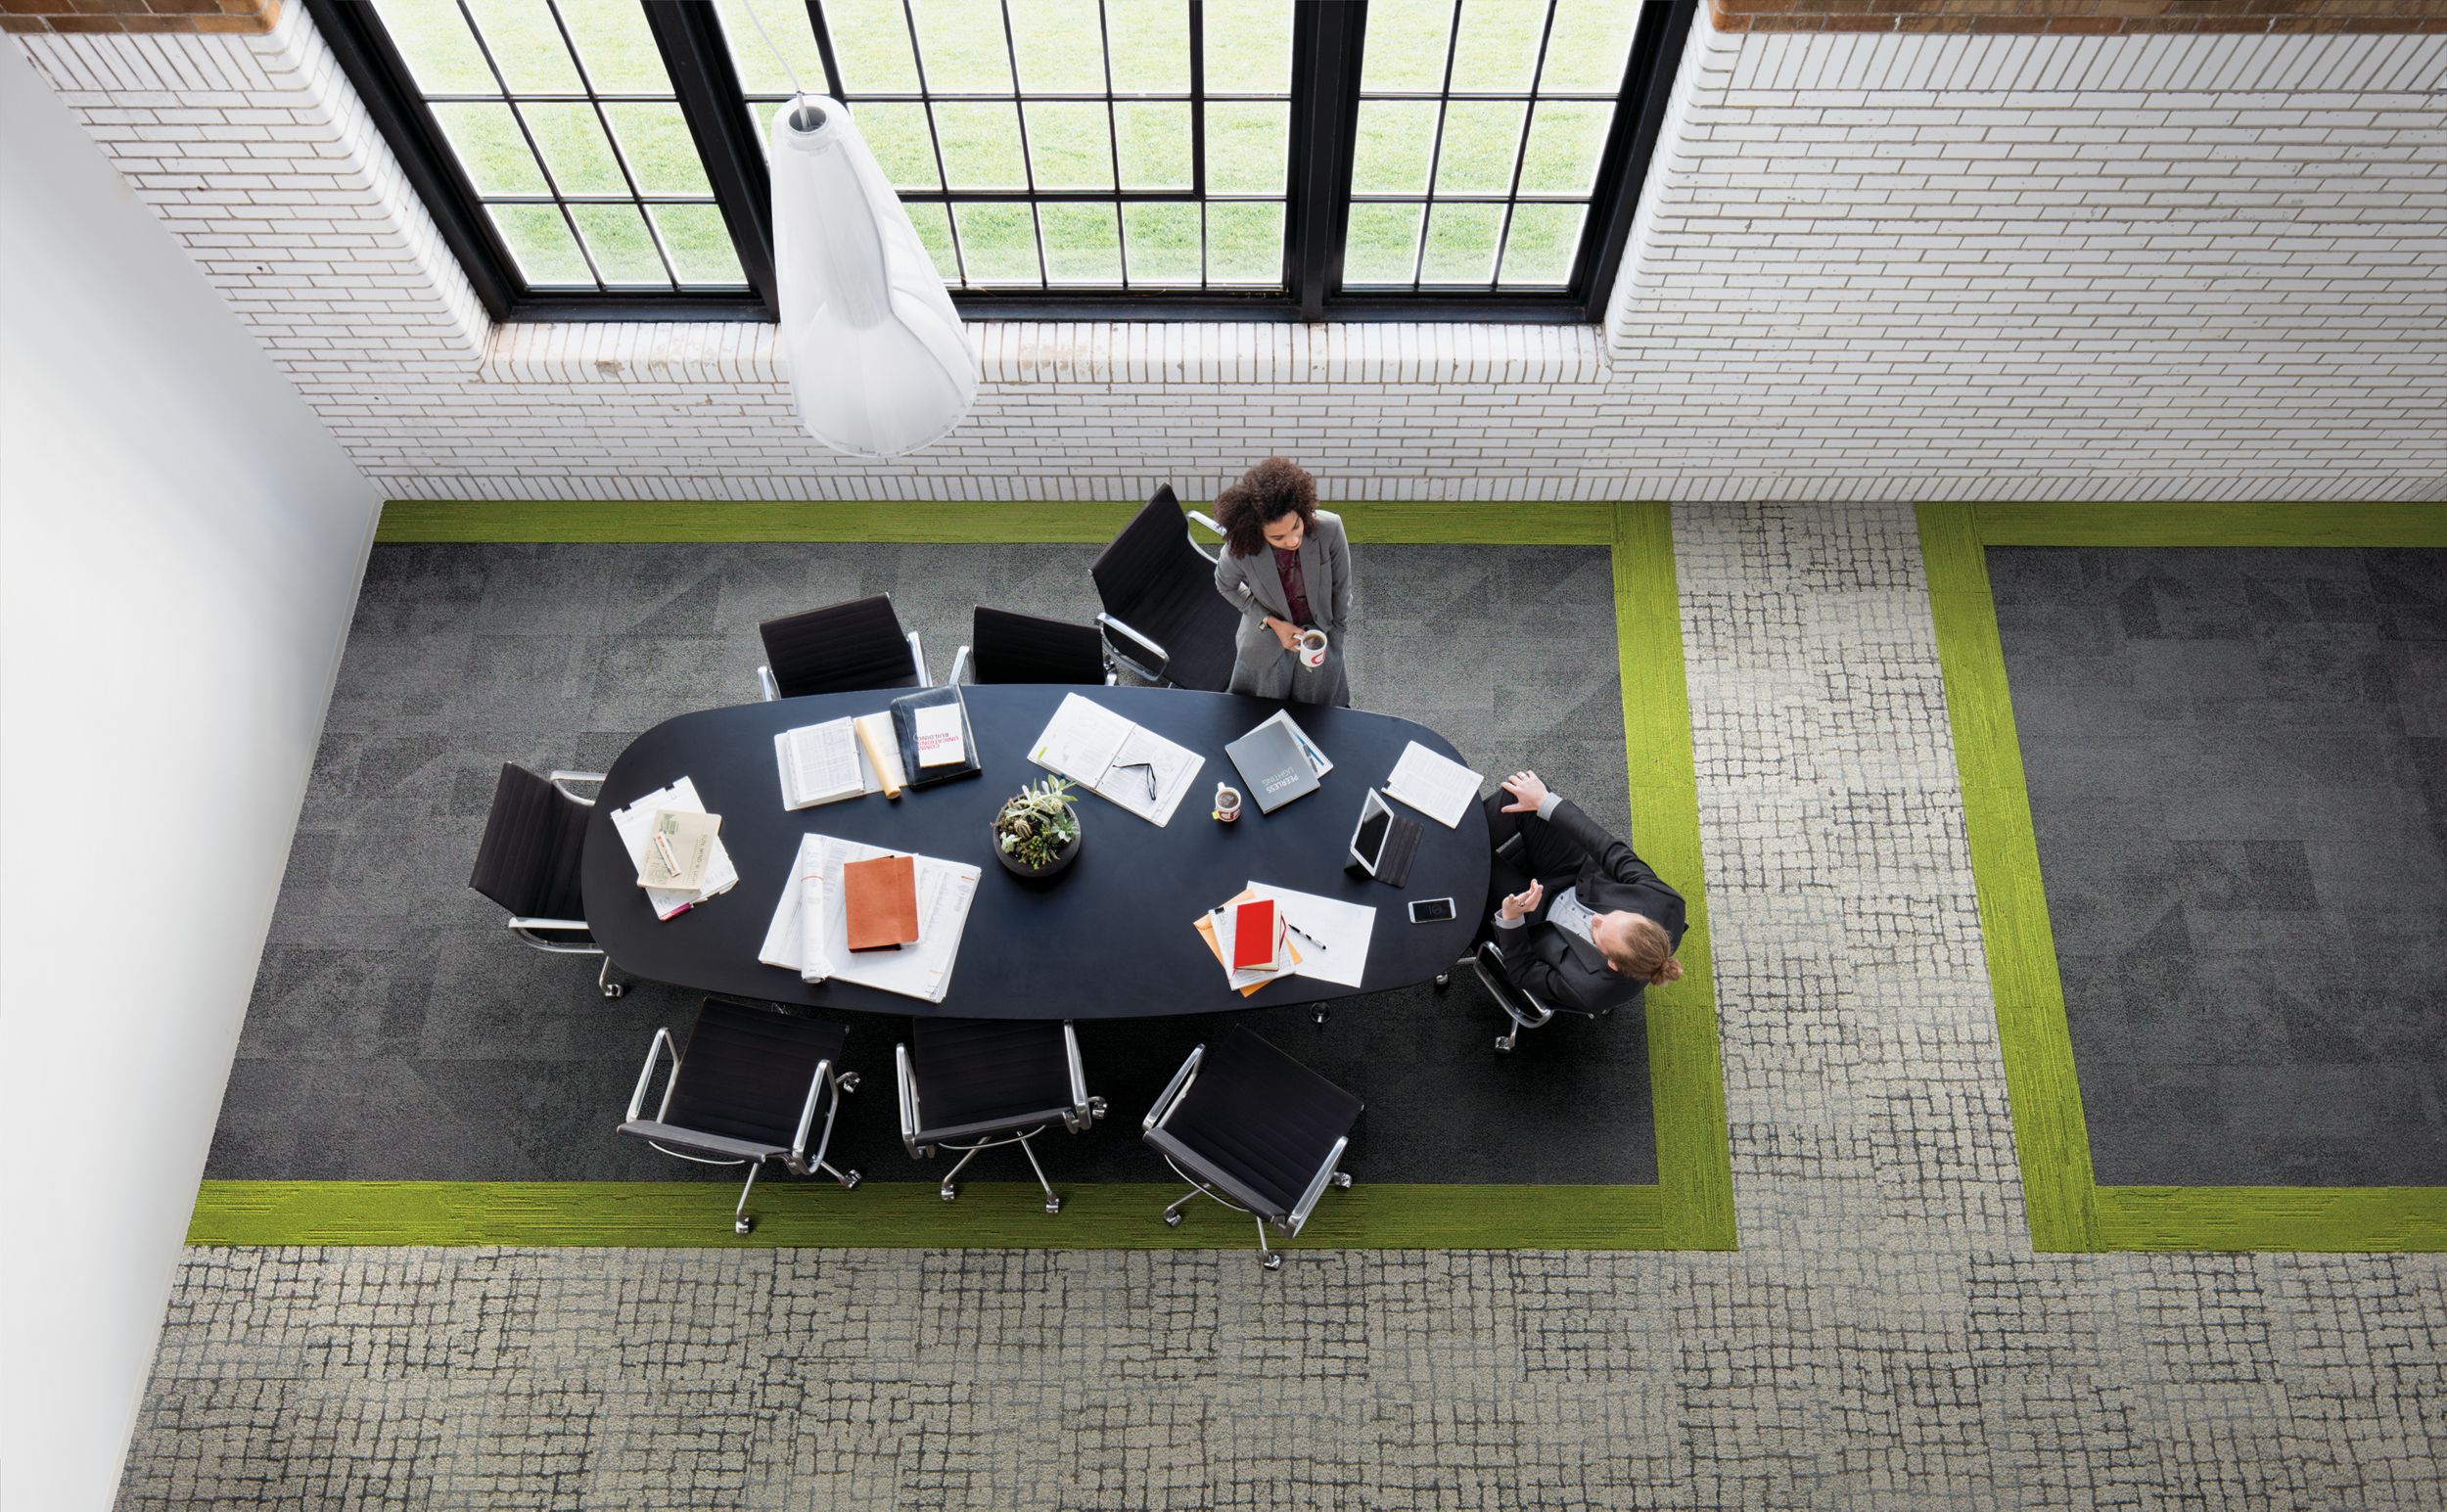 Interface Paver and Sett in Stone carpet tile with UR501 plank carpet tile in overhead view of meeting area with man and women conversating numéro d’image 6